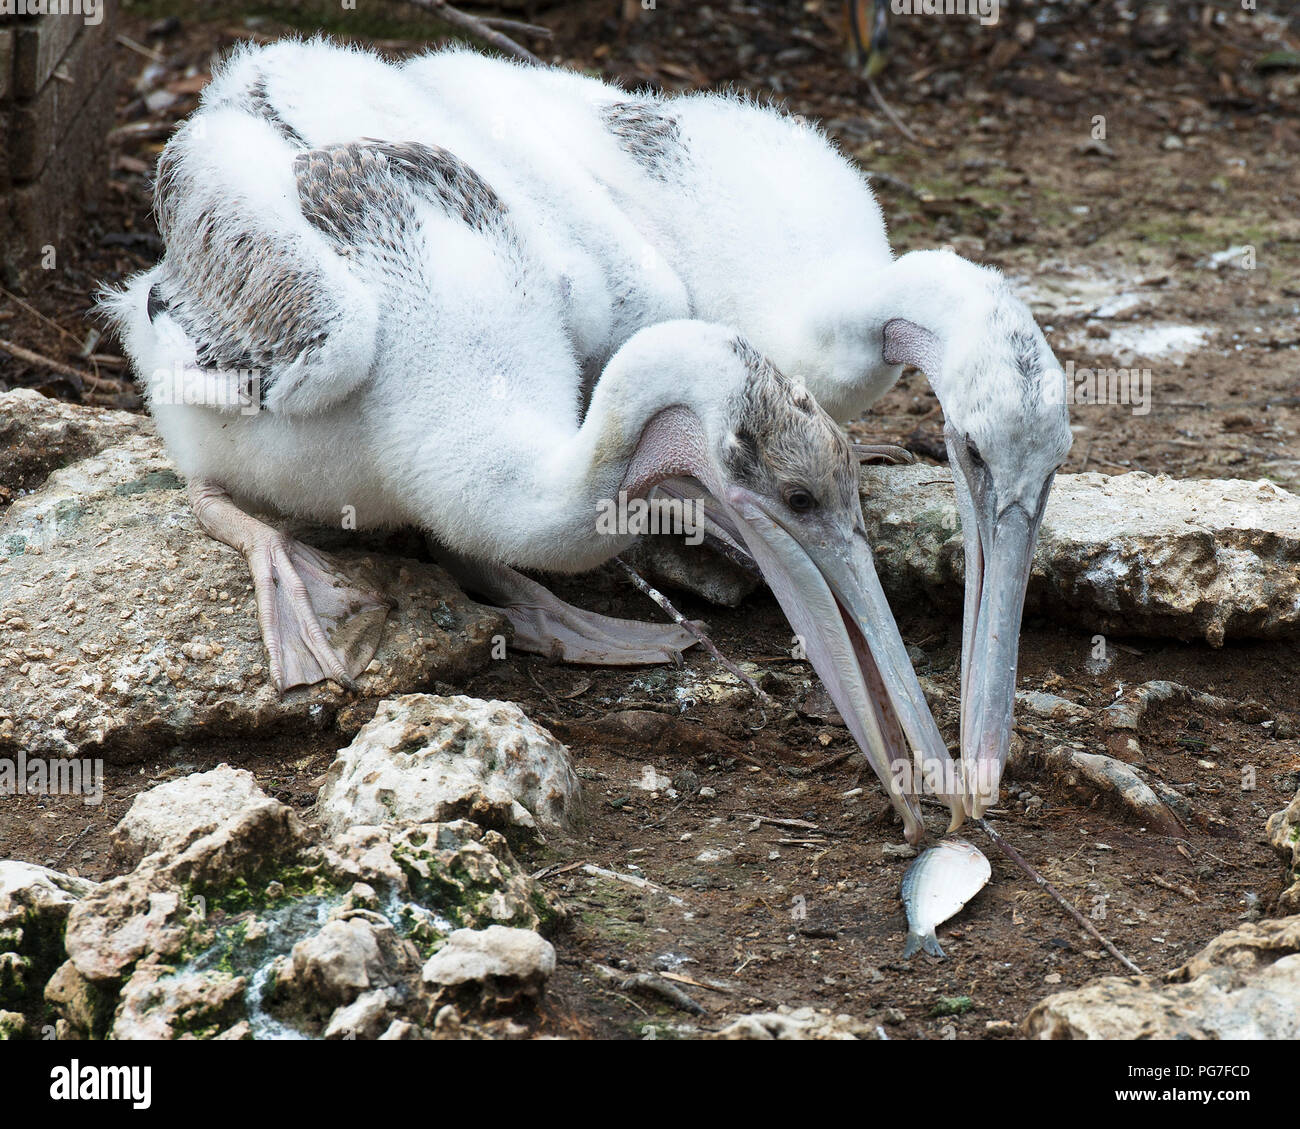 Brown pelican bird baby eating a fish with a close-up profile view in their environment and surrounding. Two Brown pelican bird babies. Stock Photo